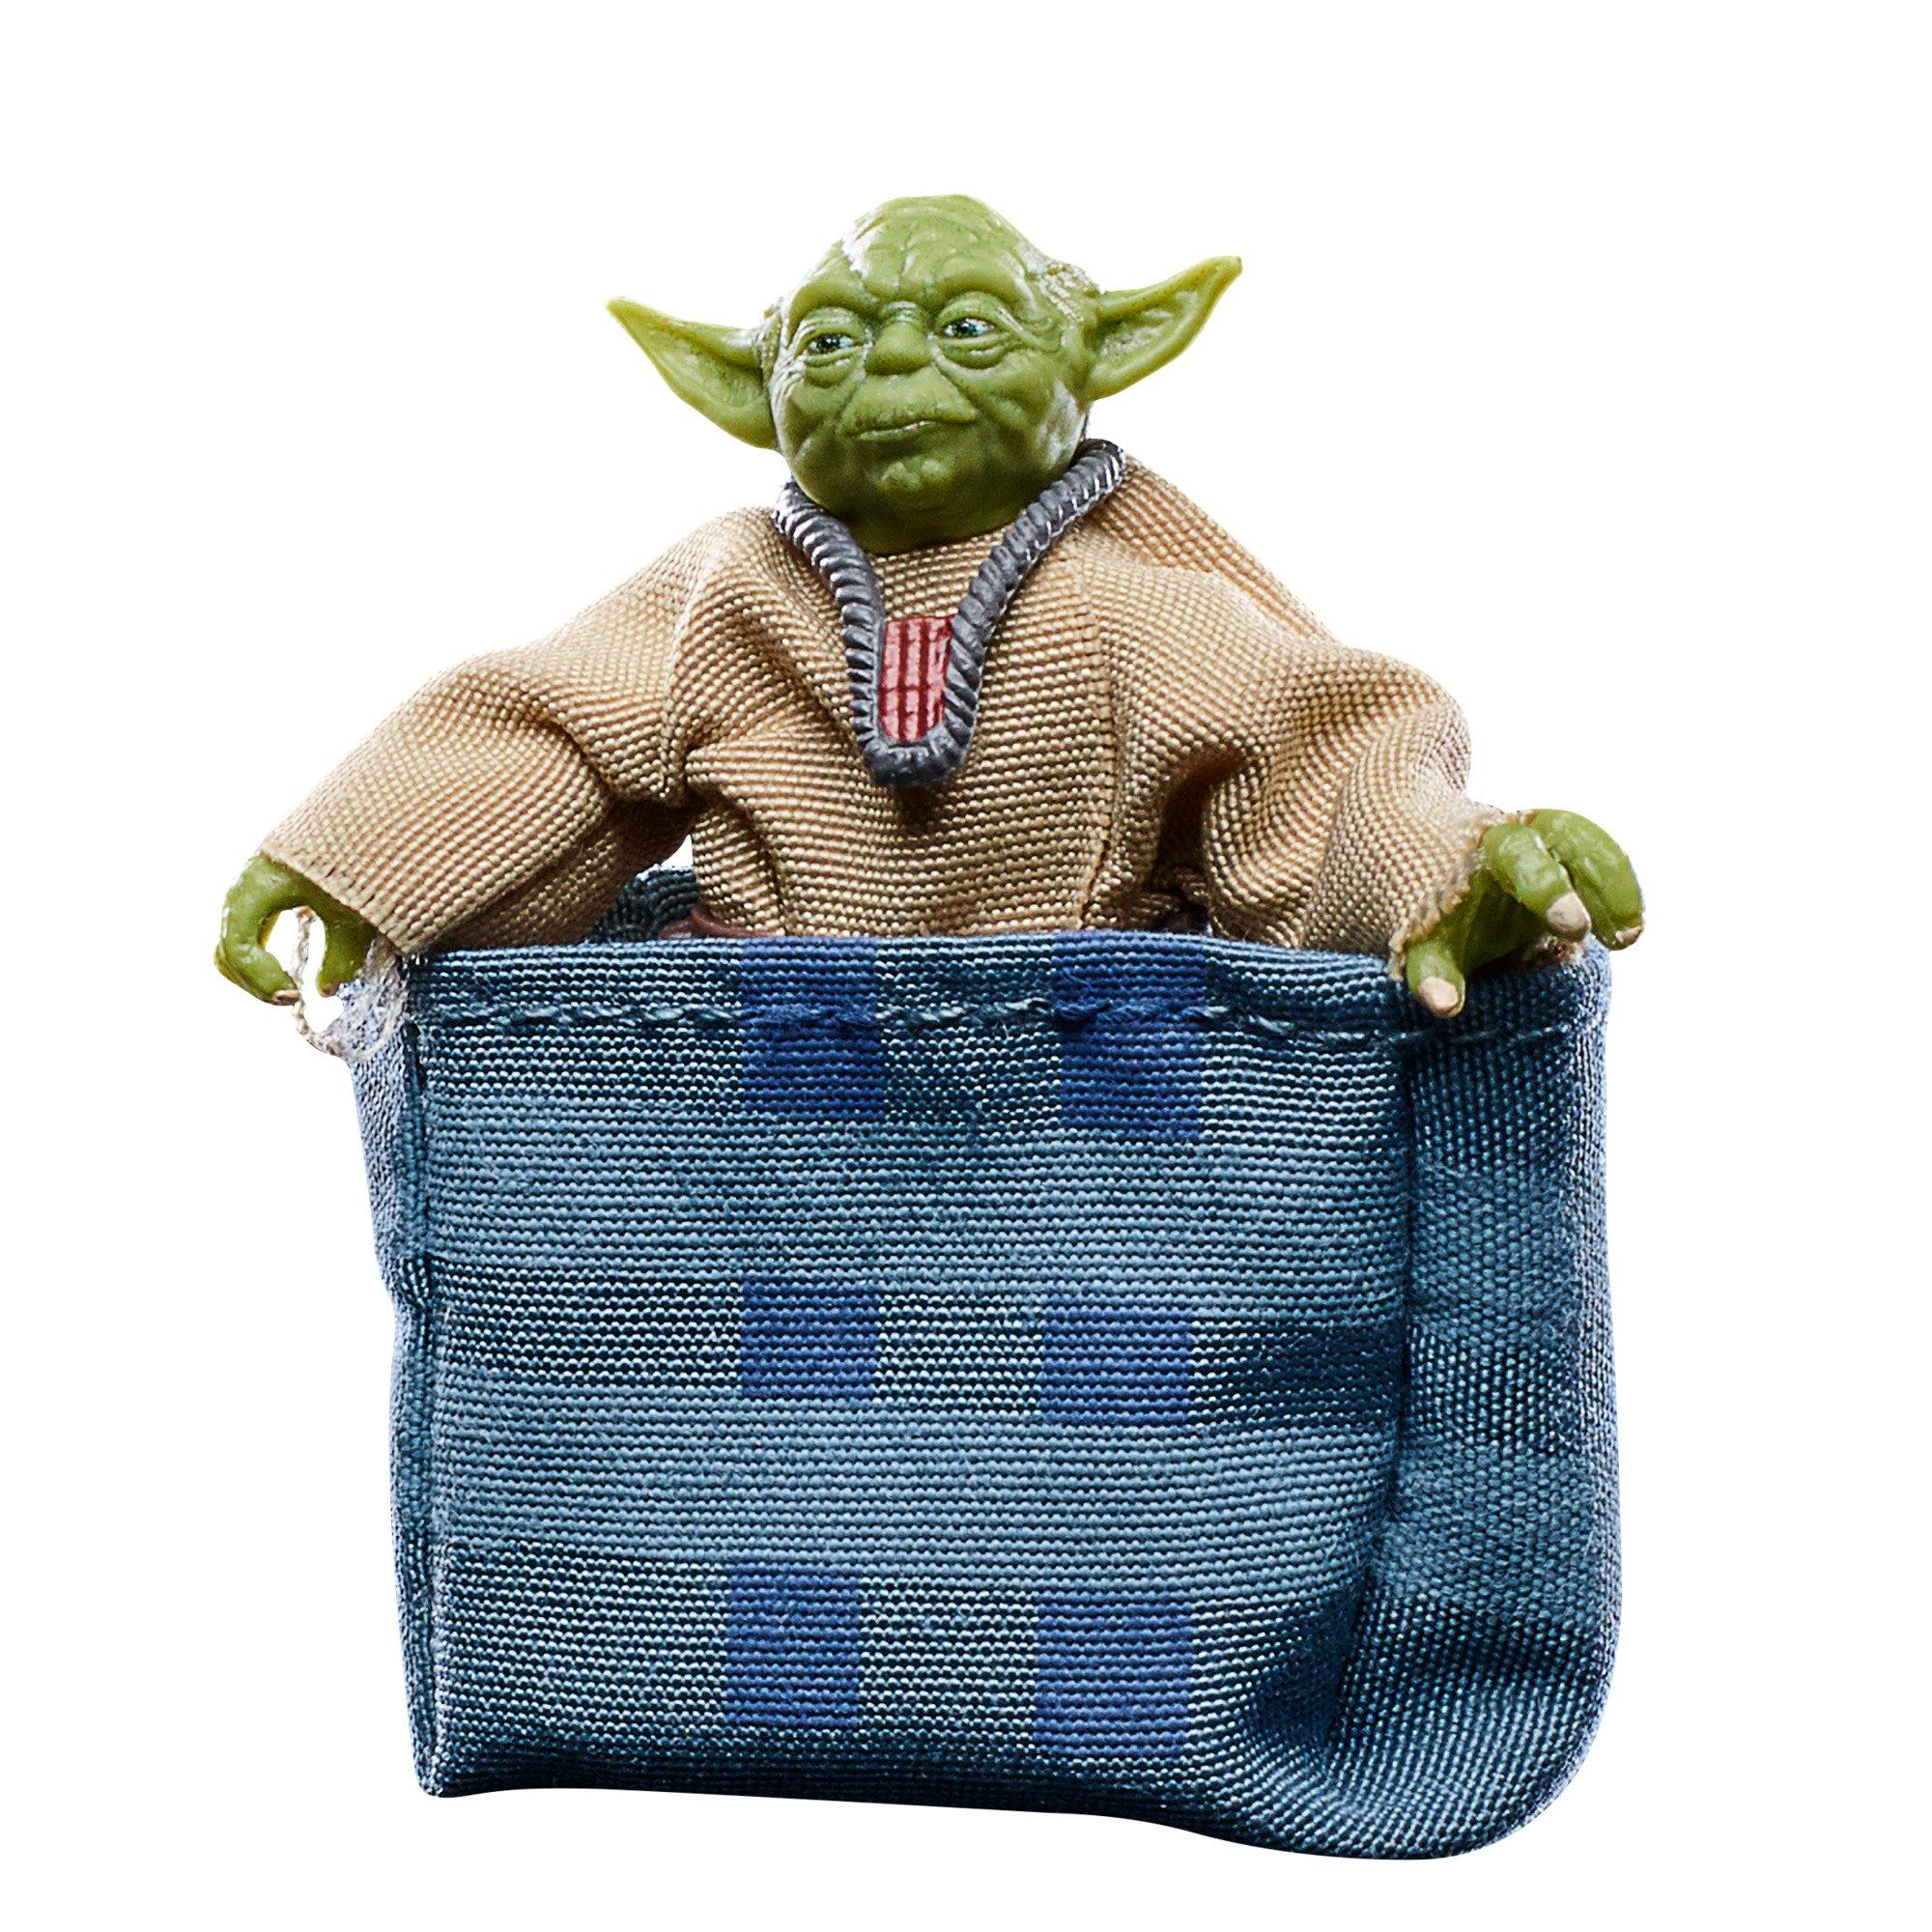 Hasbro Star Wars The Vintage Collection The Empire Strikes Back Yoda 3.75-in Scale Action Figure